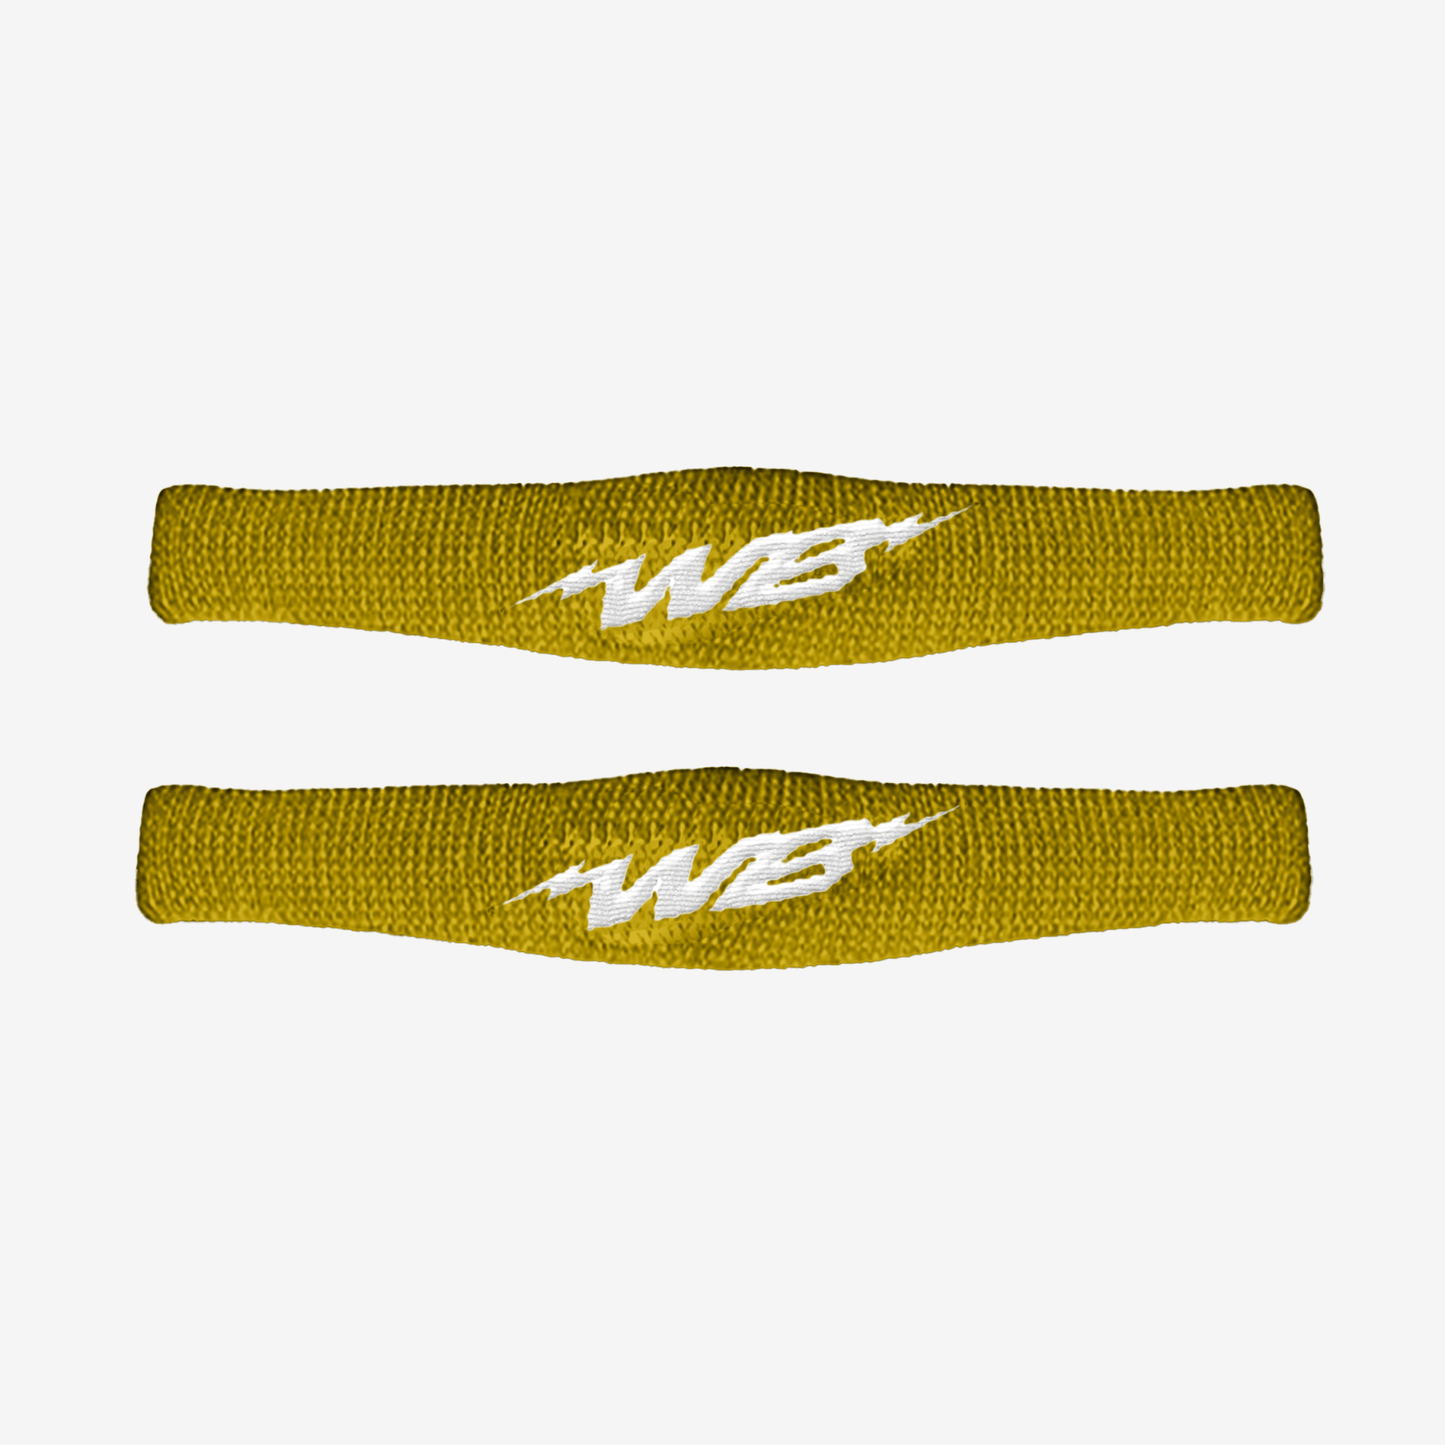 SKINNY BICEP BANDS (2-PACK, GOLD) - We Ball Sports